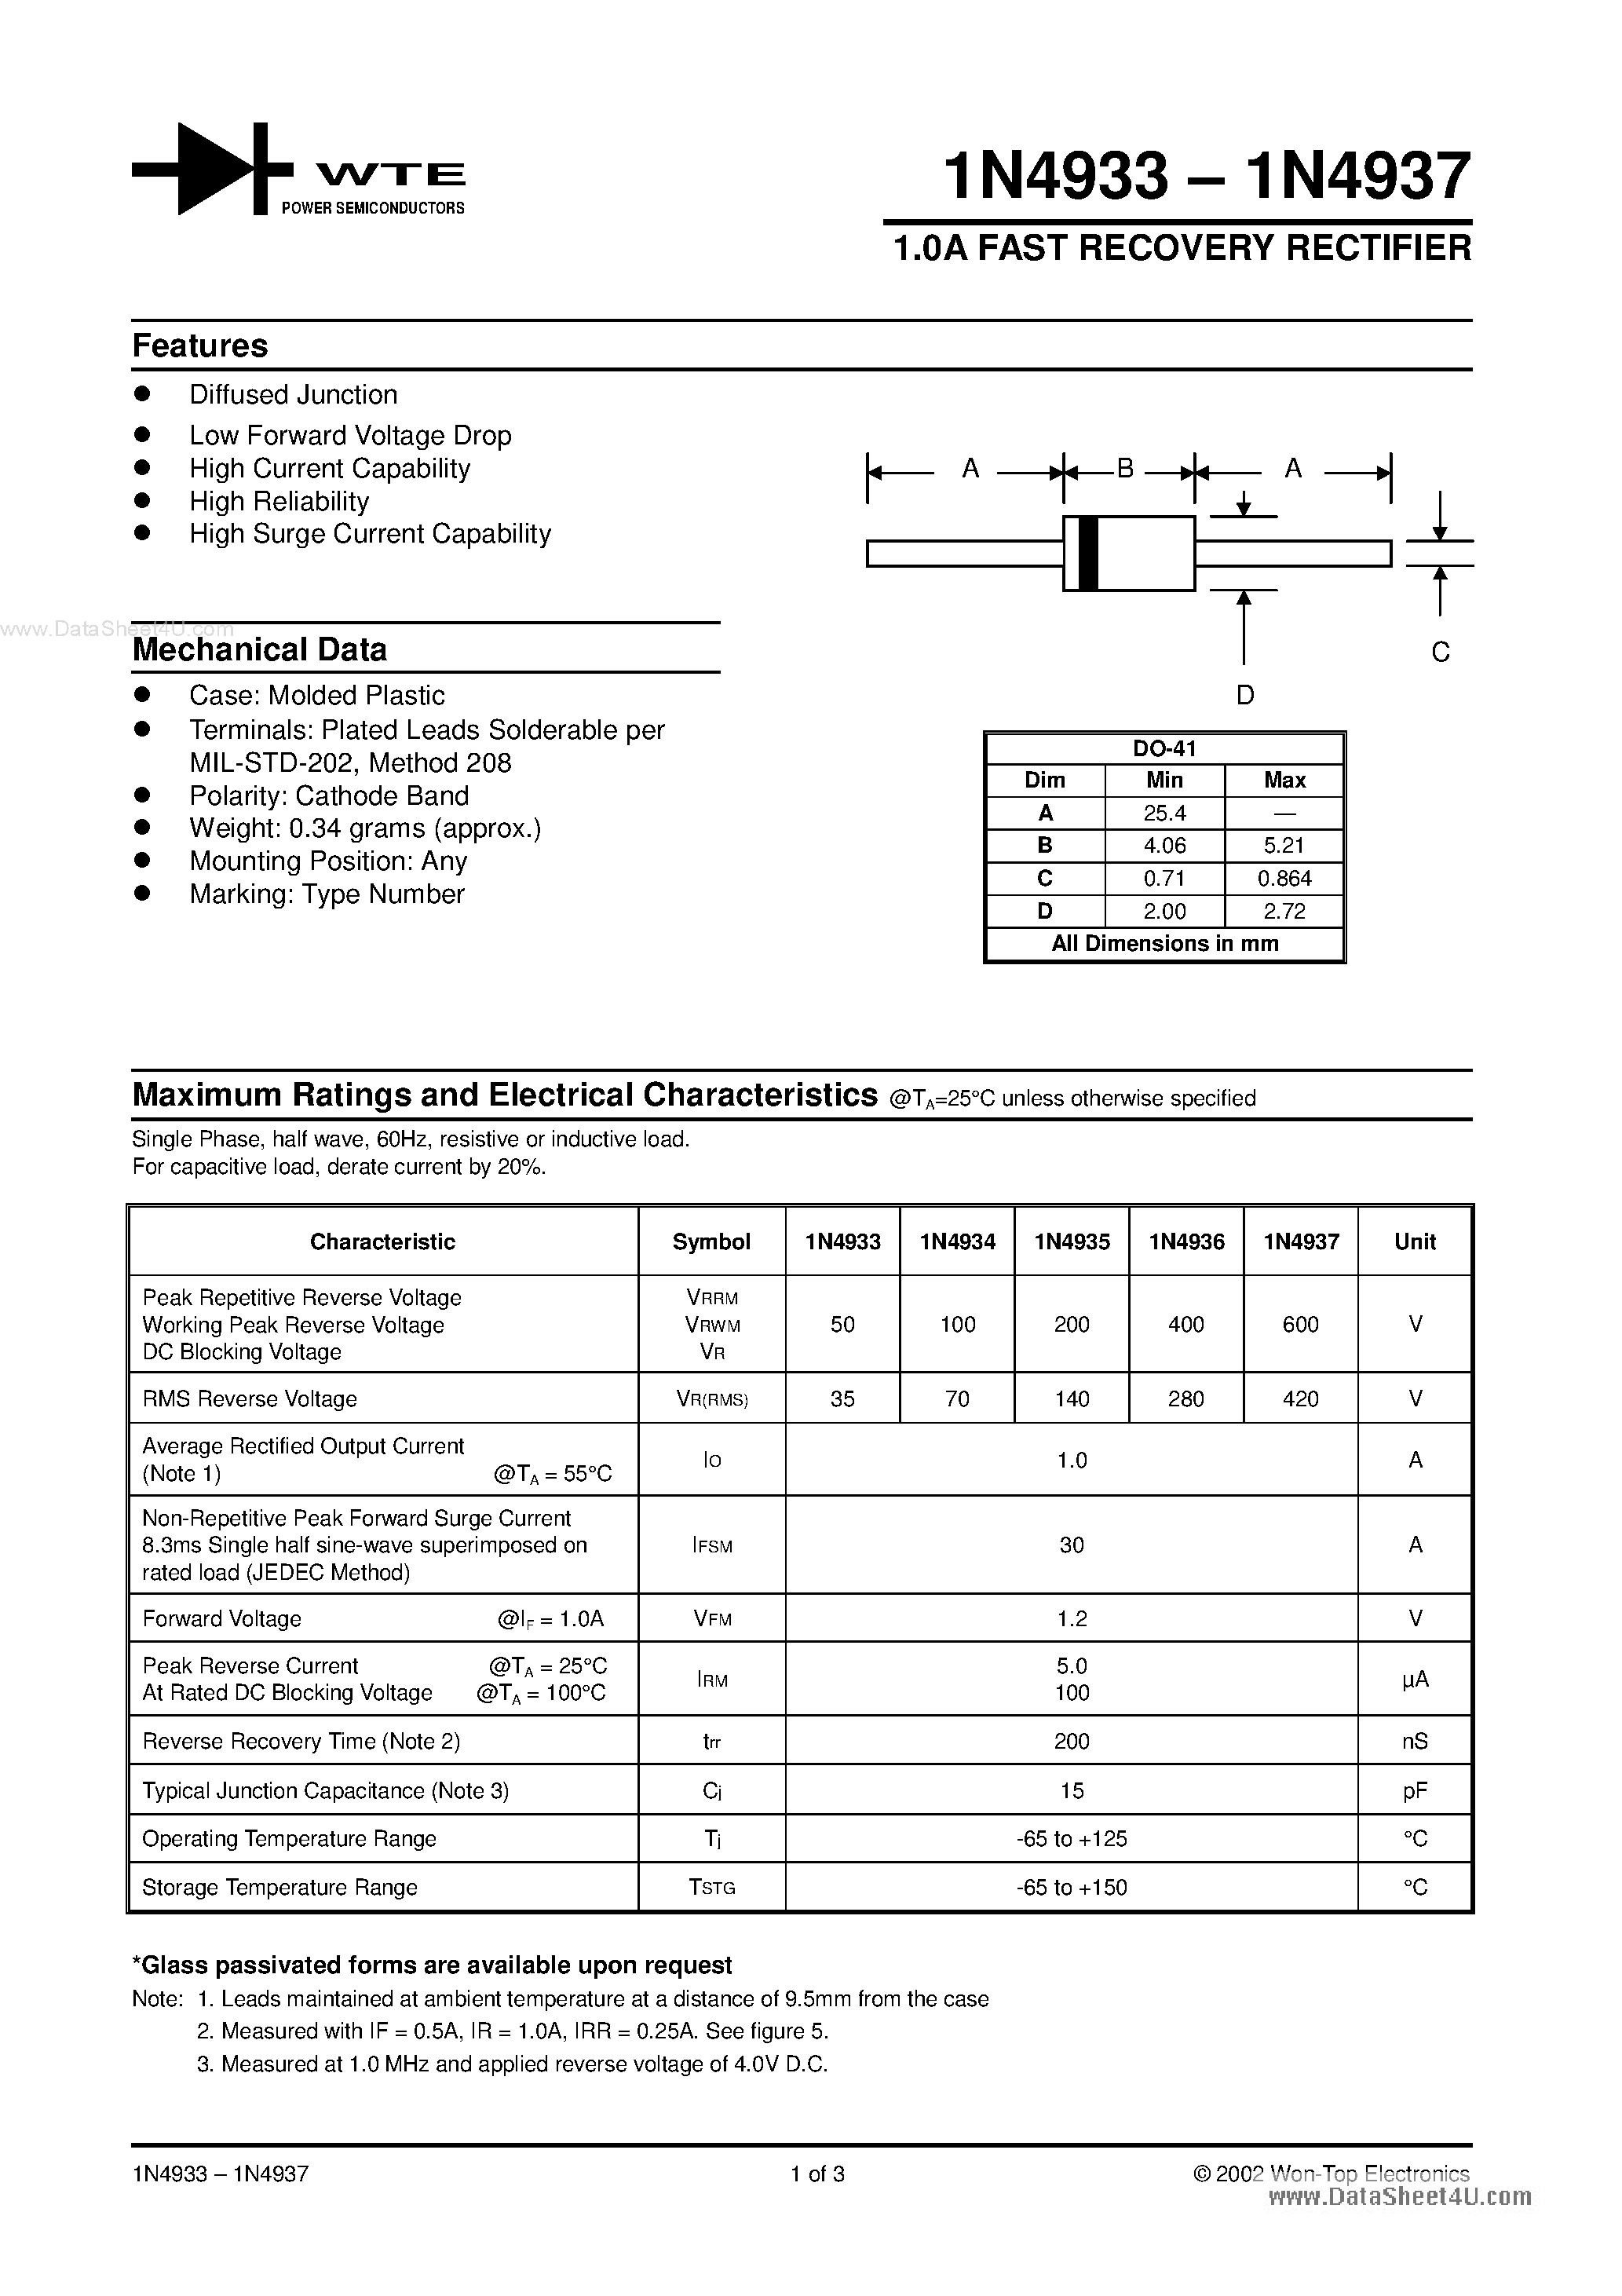 Datasheet IN4933 - (IN4933 - IN4937) 1.0A FAST RECOVERY RECTIFIER page 1